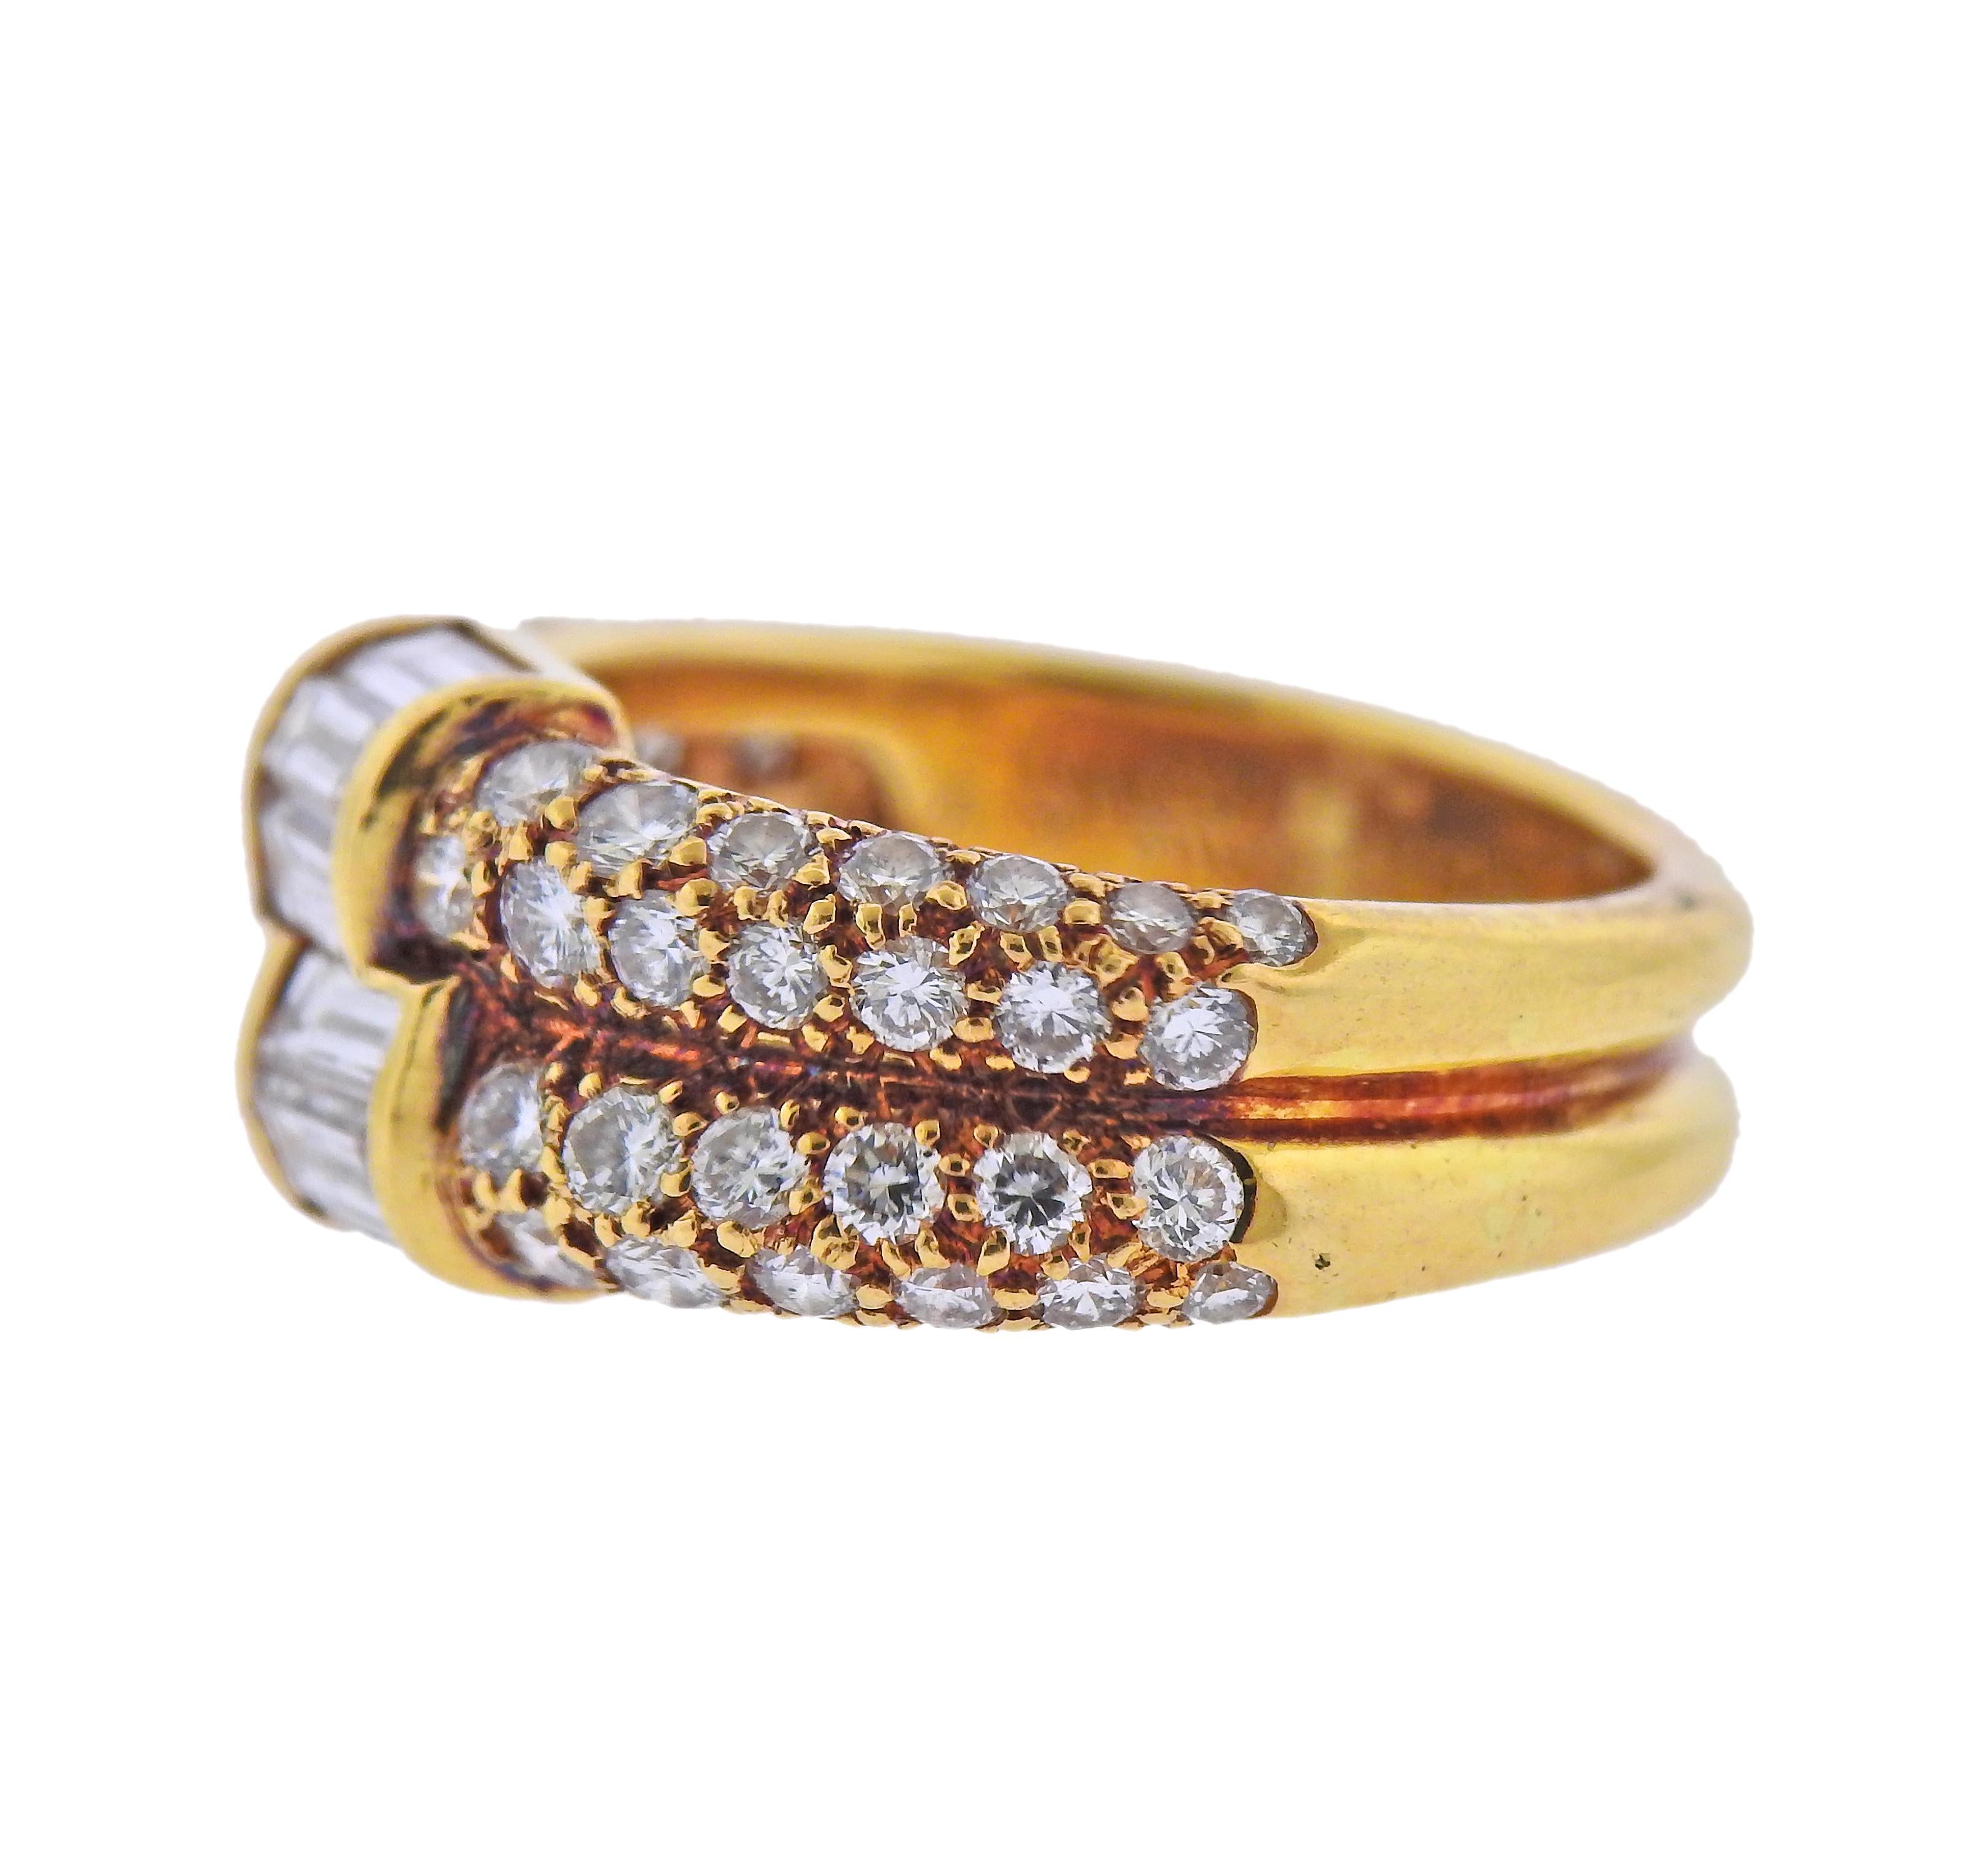 18k yellow gold ring by Van Cleef & Arpels, with 2.27ctw in diamonds. Ring size 0 5.75, ring top is 10mm wide. Marked: VCA, 18kt, 83, 2ct27, C 5402 A S. Weight - 7.6 grams. 